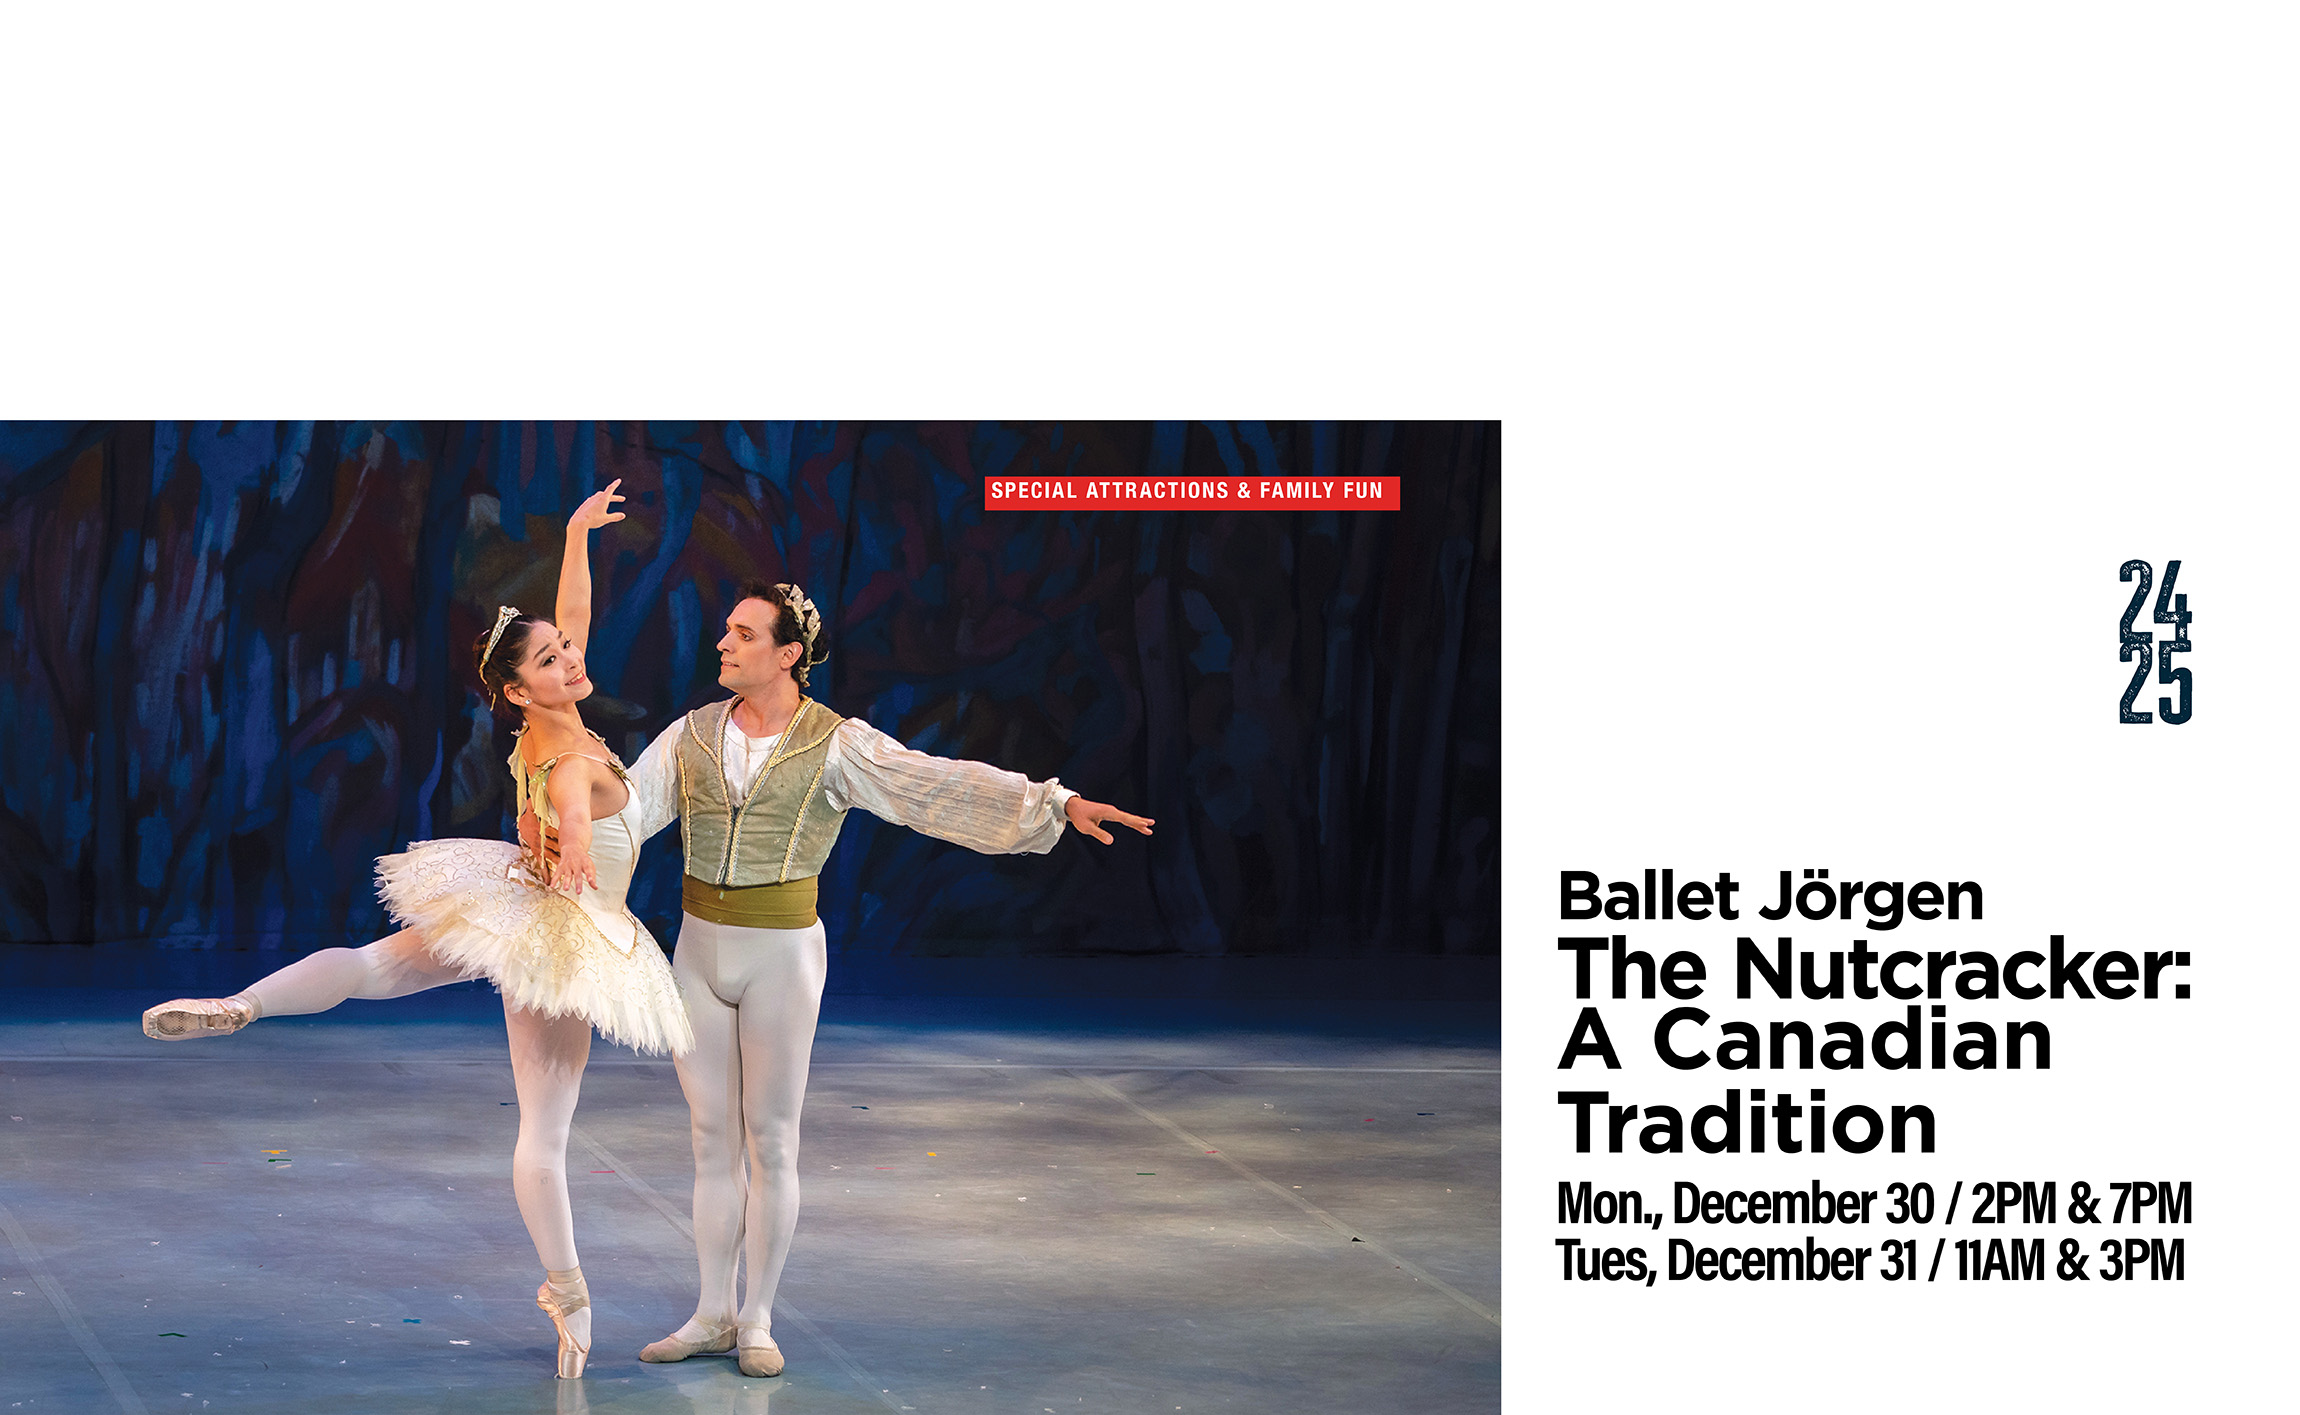 A ballerina in a white tutu and a male dancer in white perform a ballet on stage. Text on the right reads: "Ballet Jörgen The Nutcracker: A Canadian Tradition." Performance dates and times are listed as Monday, December 30 at 2 PM and 7 PM, and Tuesday, December 31 at 11 AM and 3 PM.